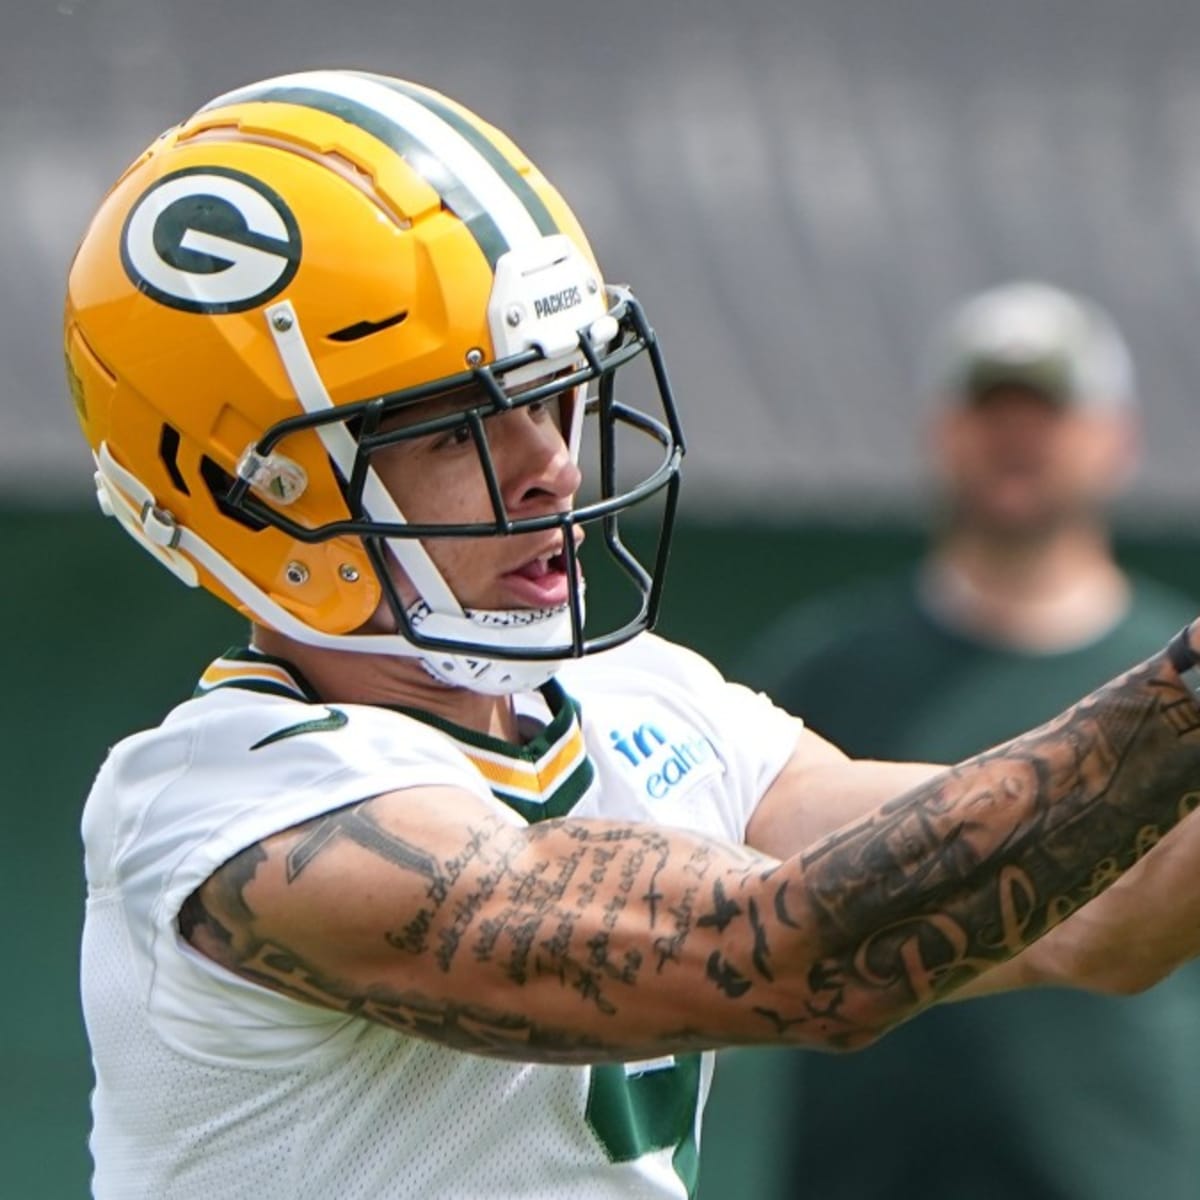 Keisean Nixon, Shawn Davis could emerge as top backups for Packers